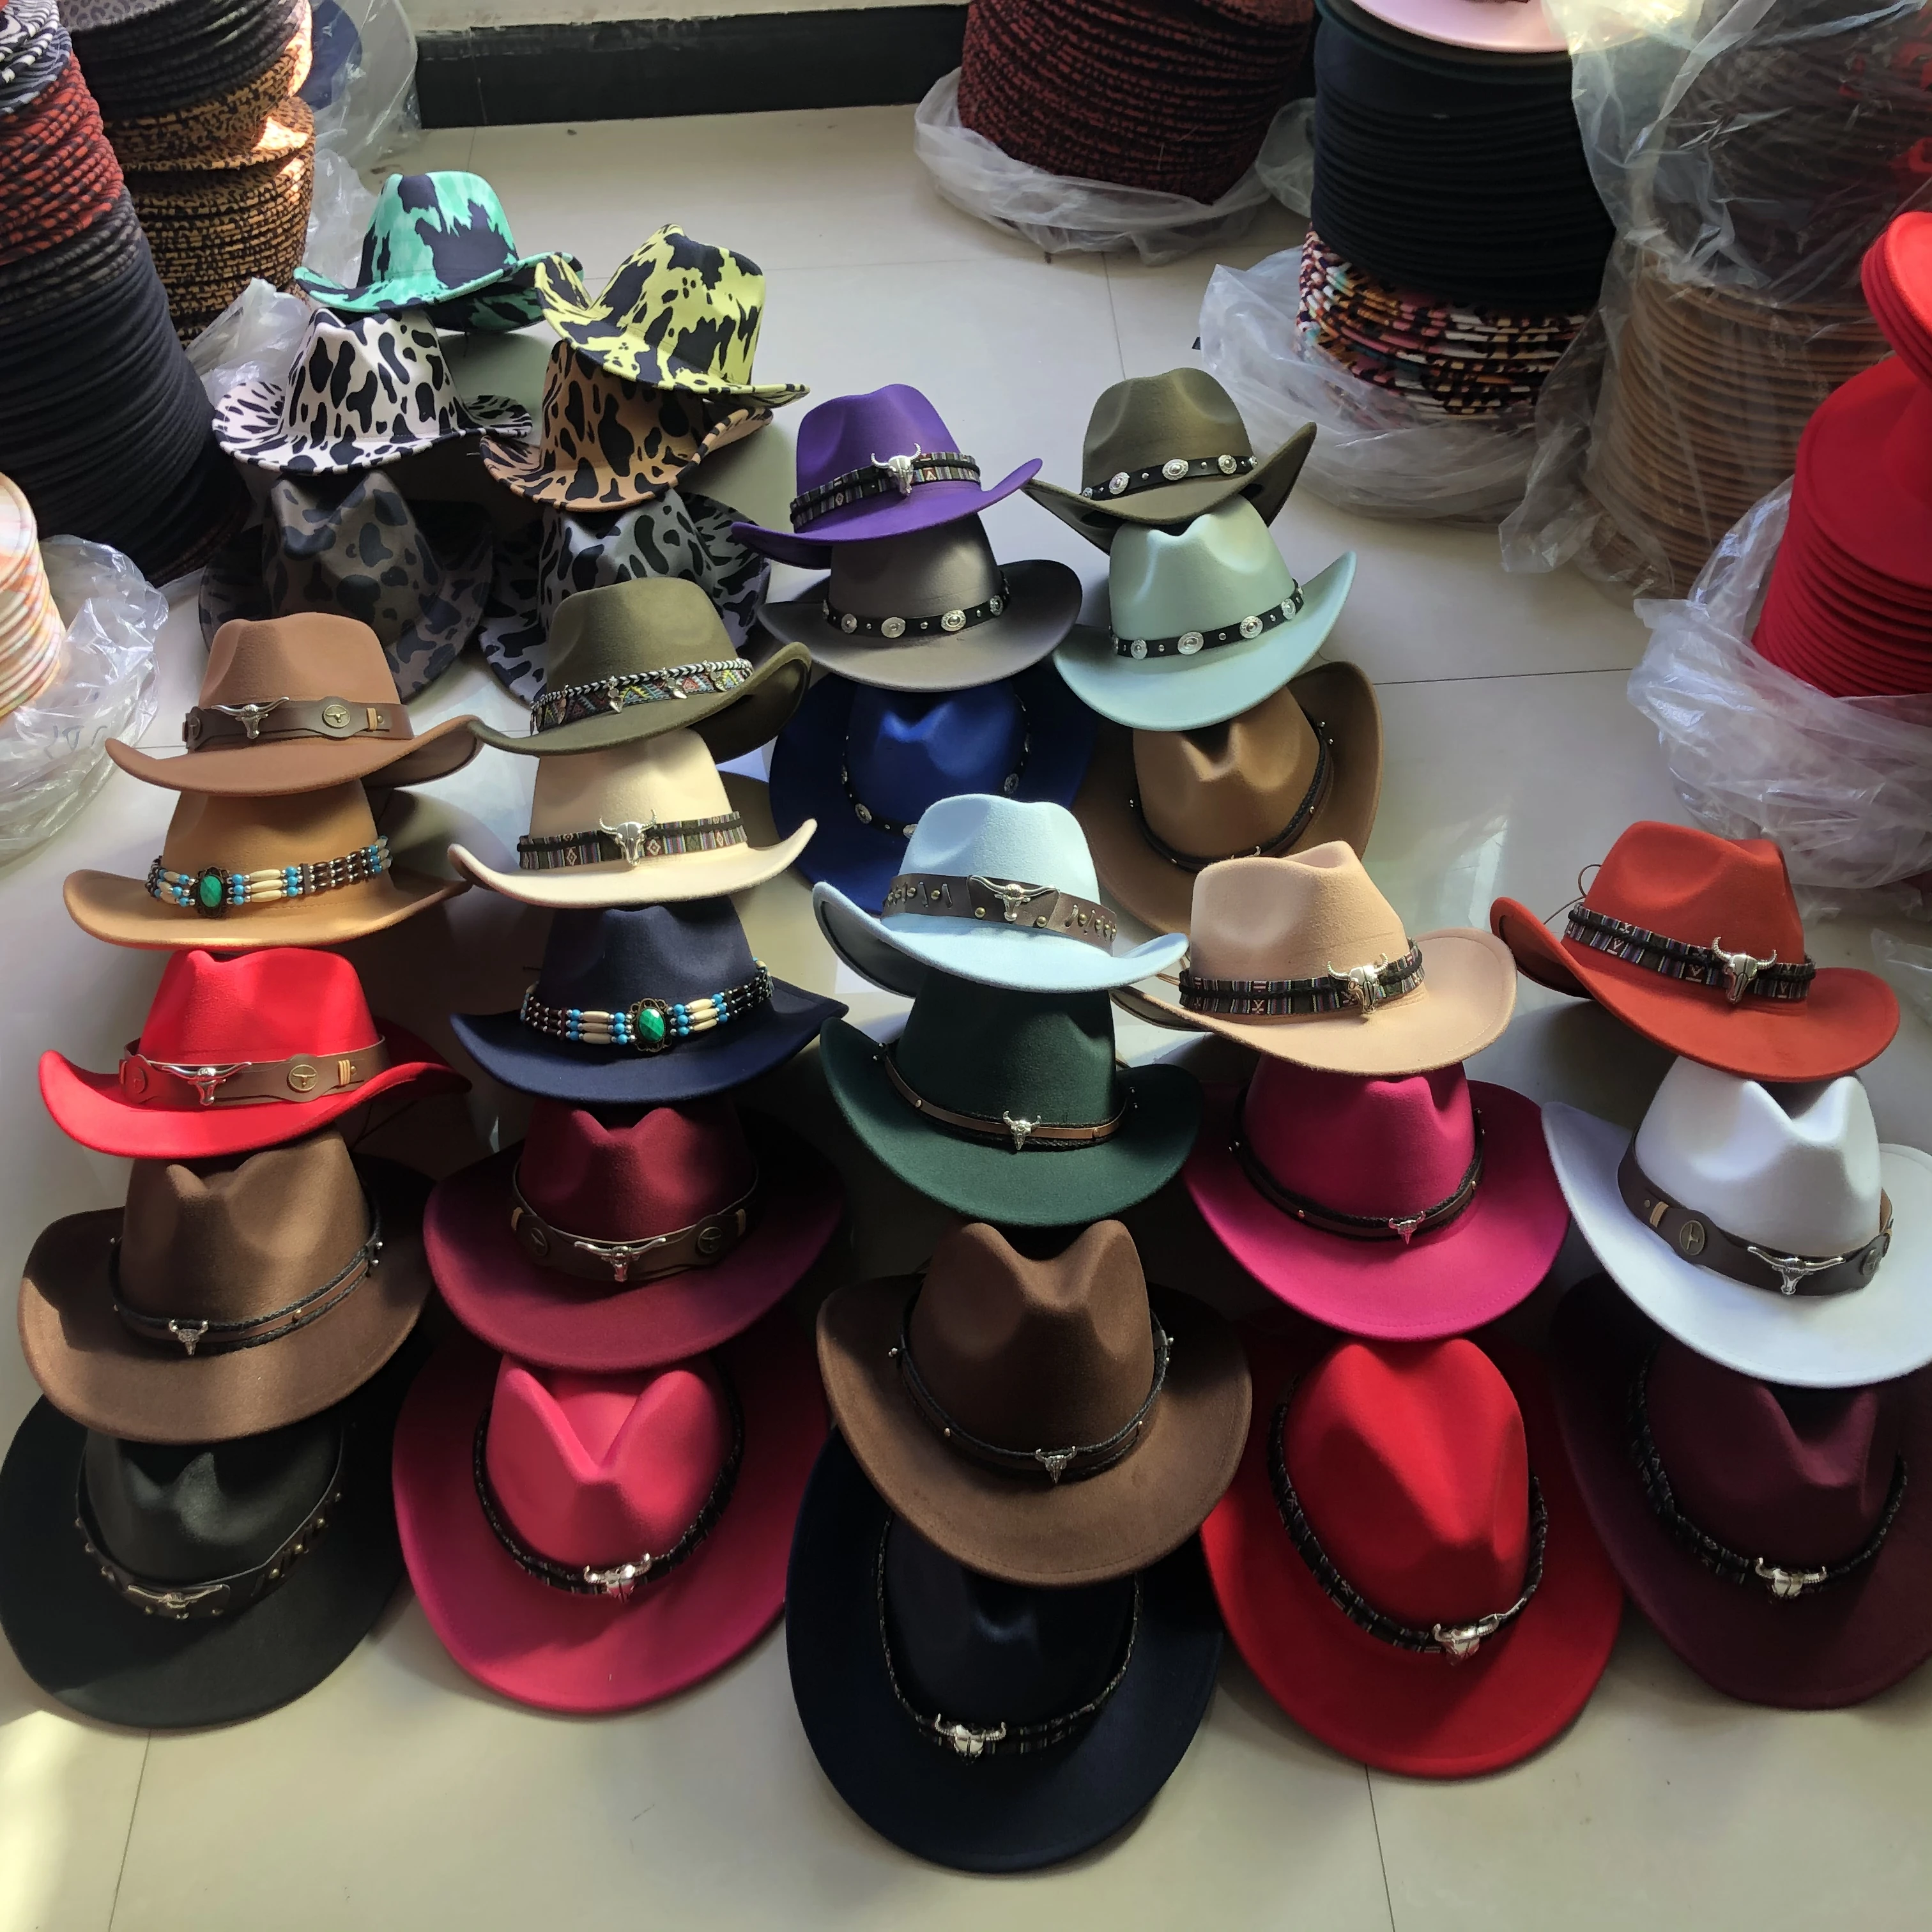 Premium Suede Hat Western Hat Fedora Hats Fall Accessories Fall